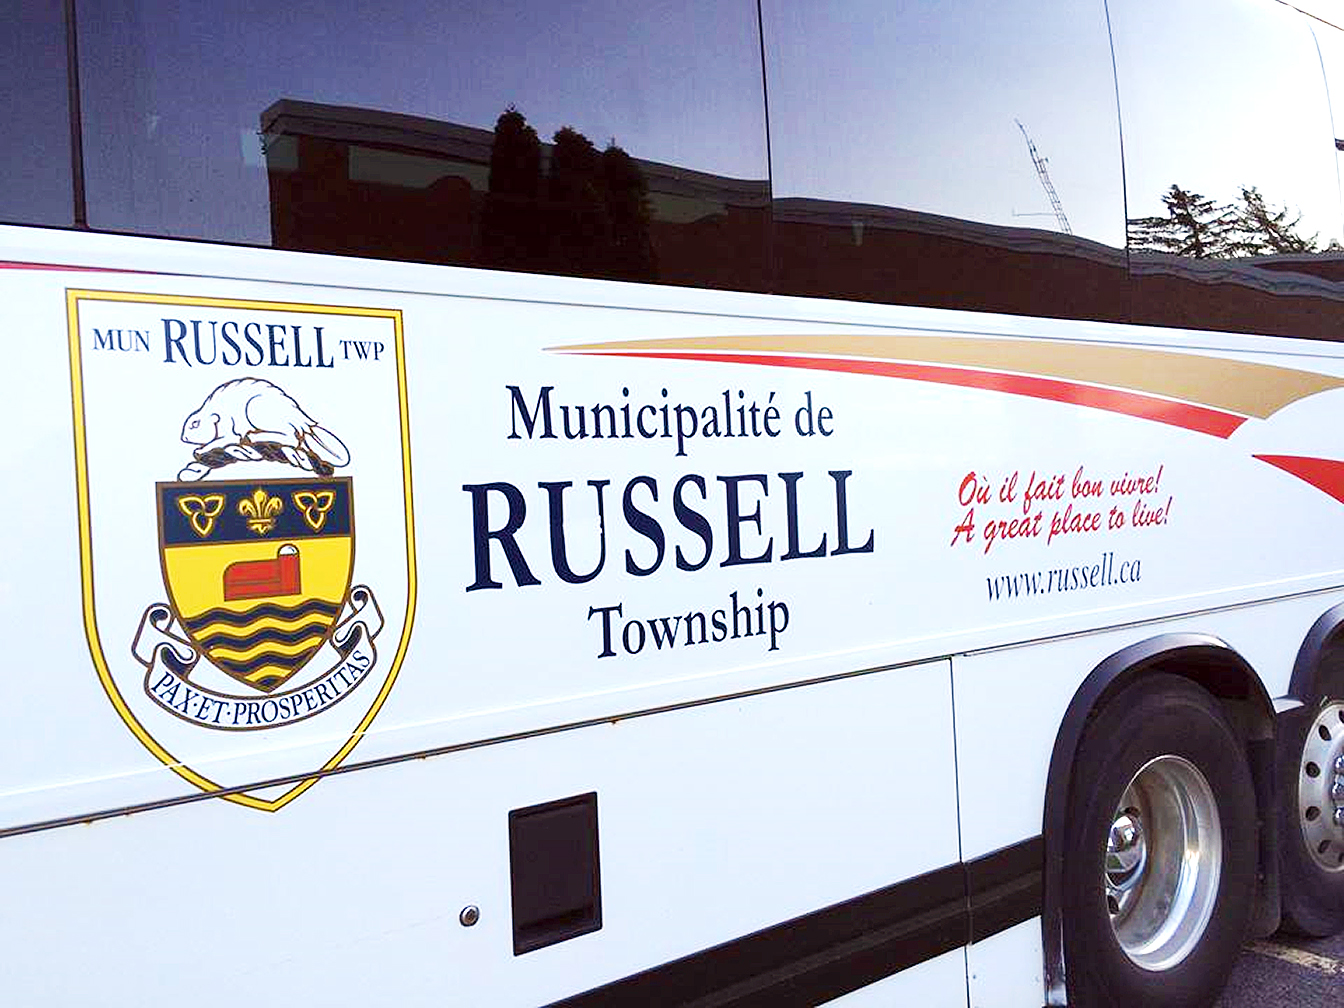 Another bus for Russell Transpo